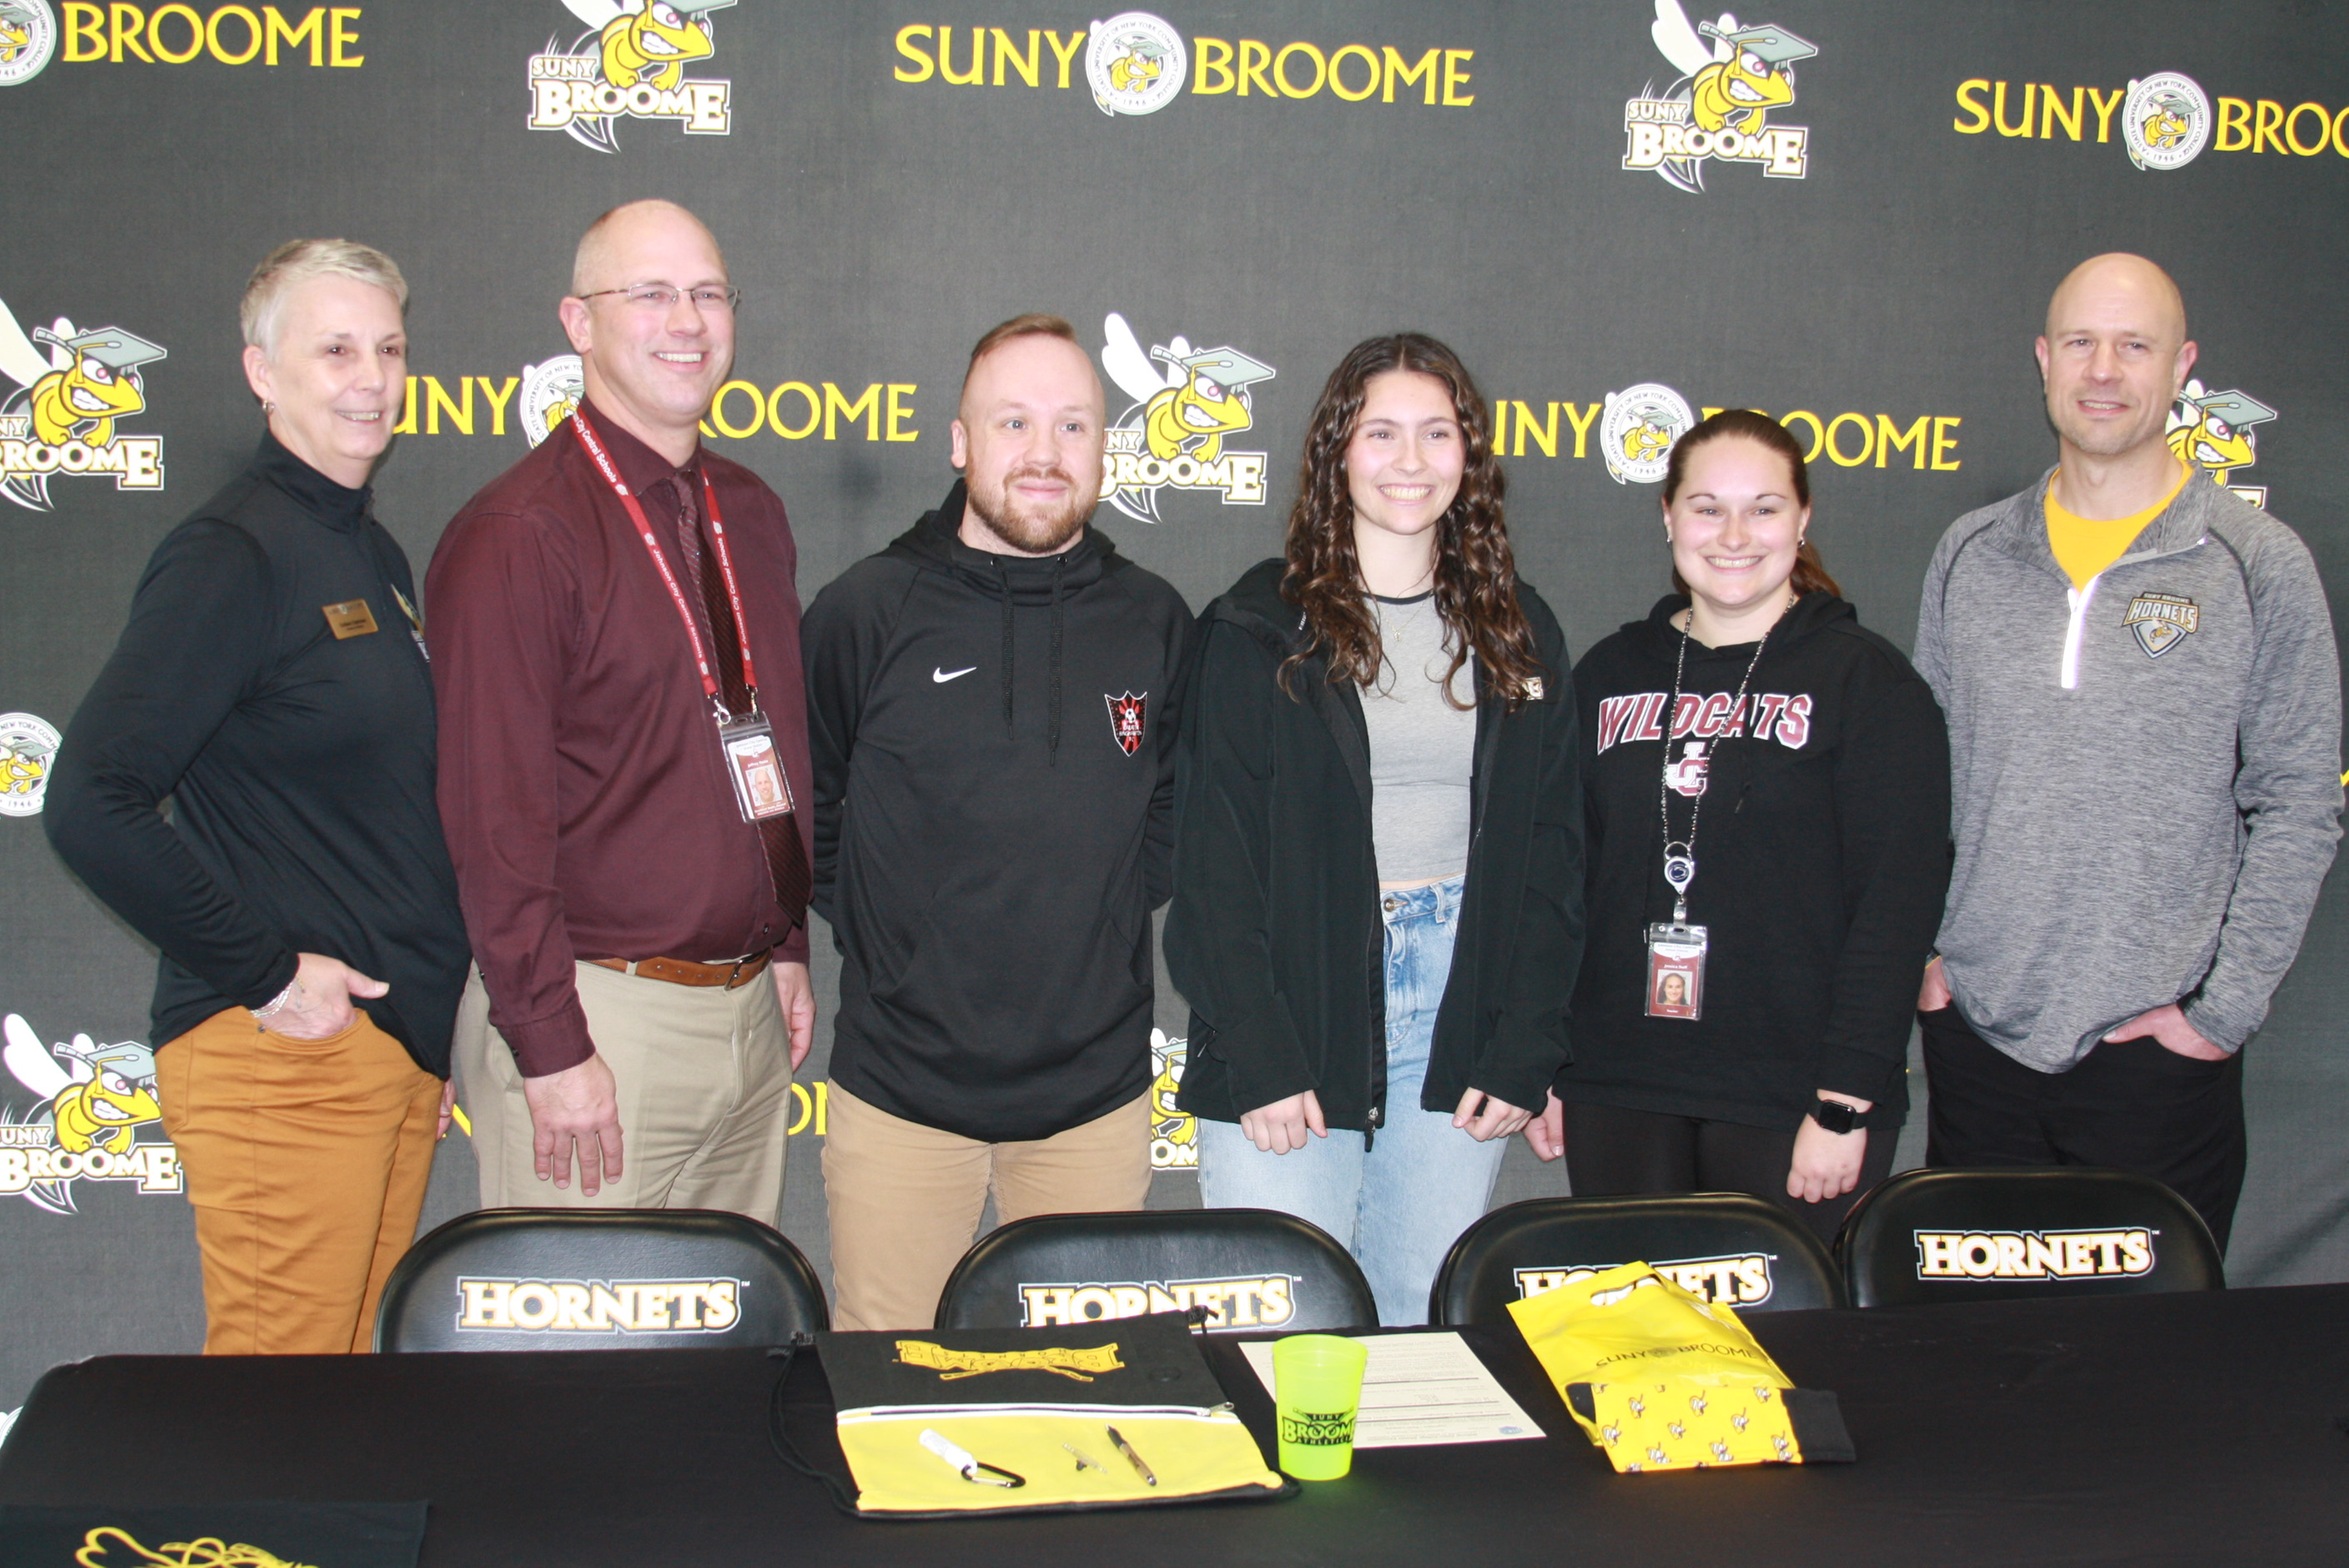 NLI signing at Broome